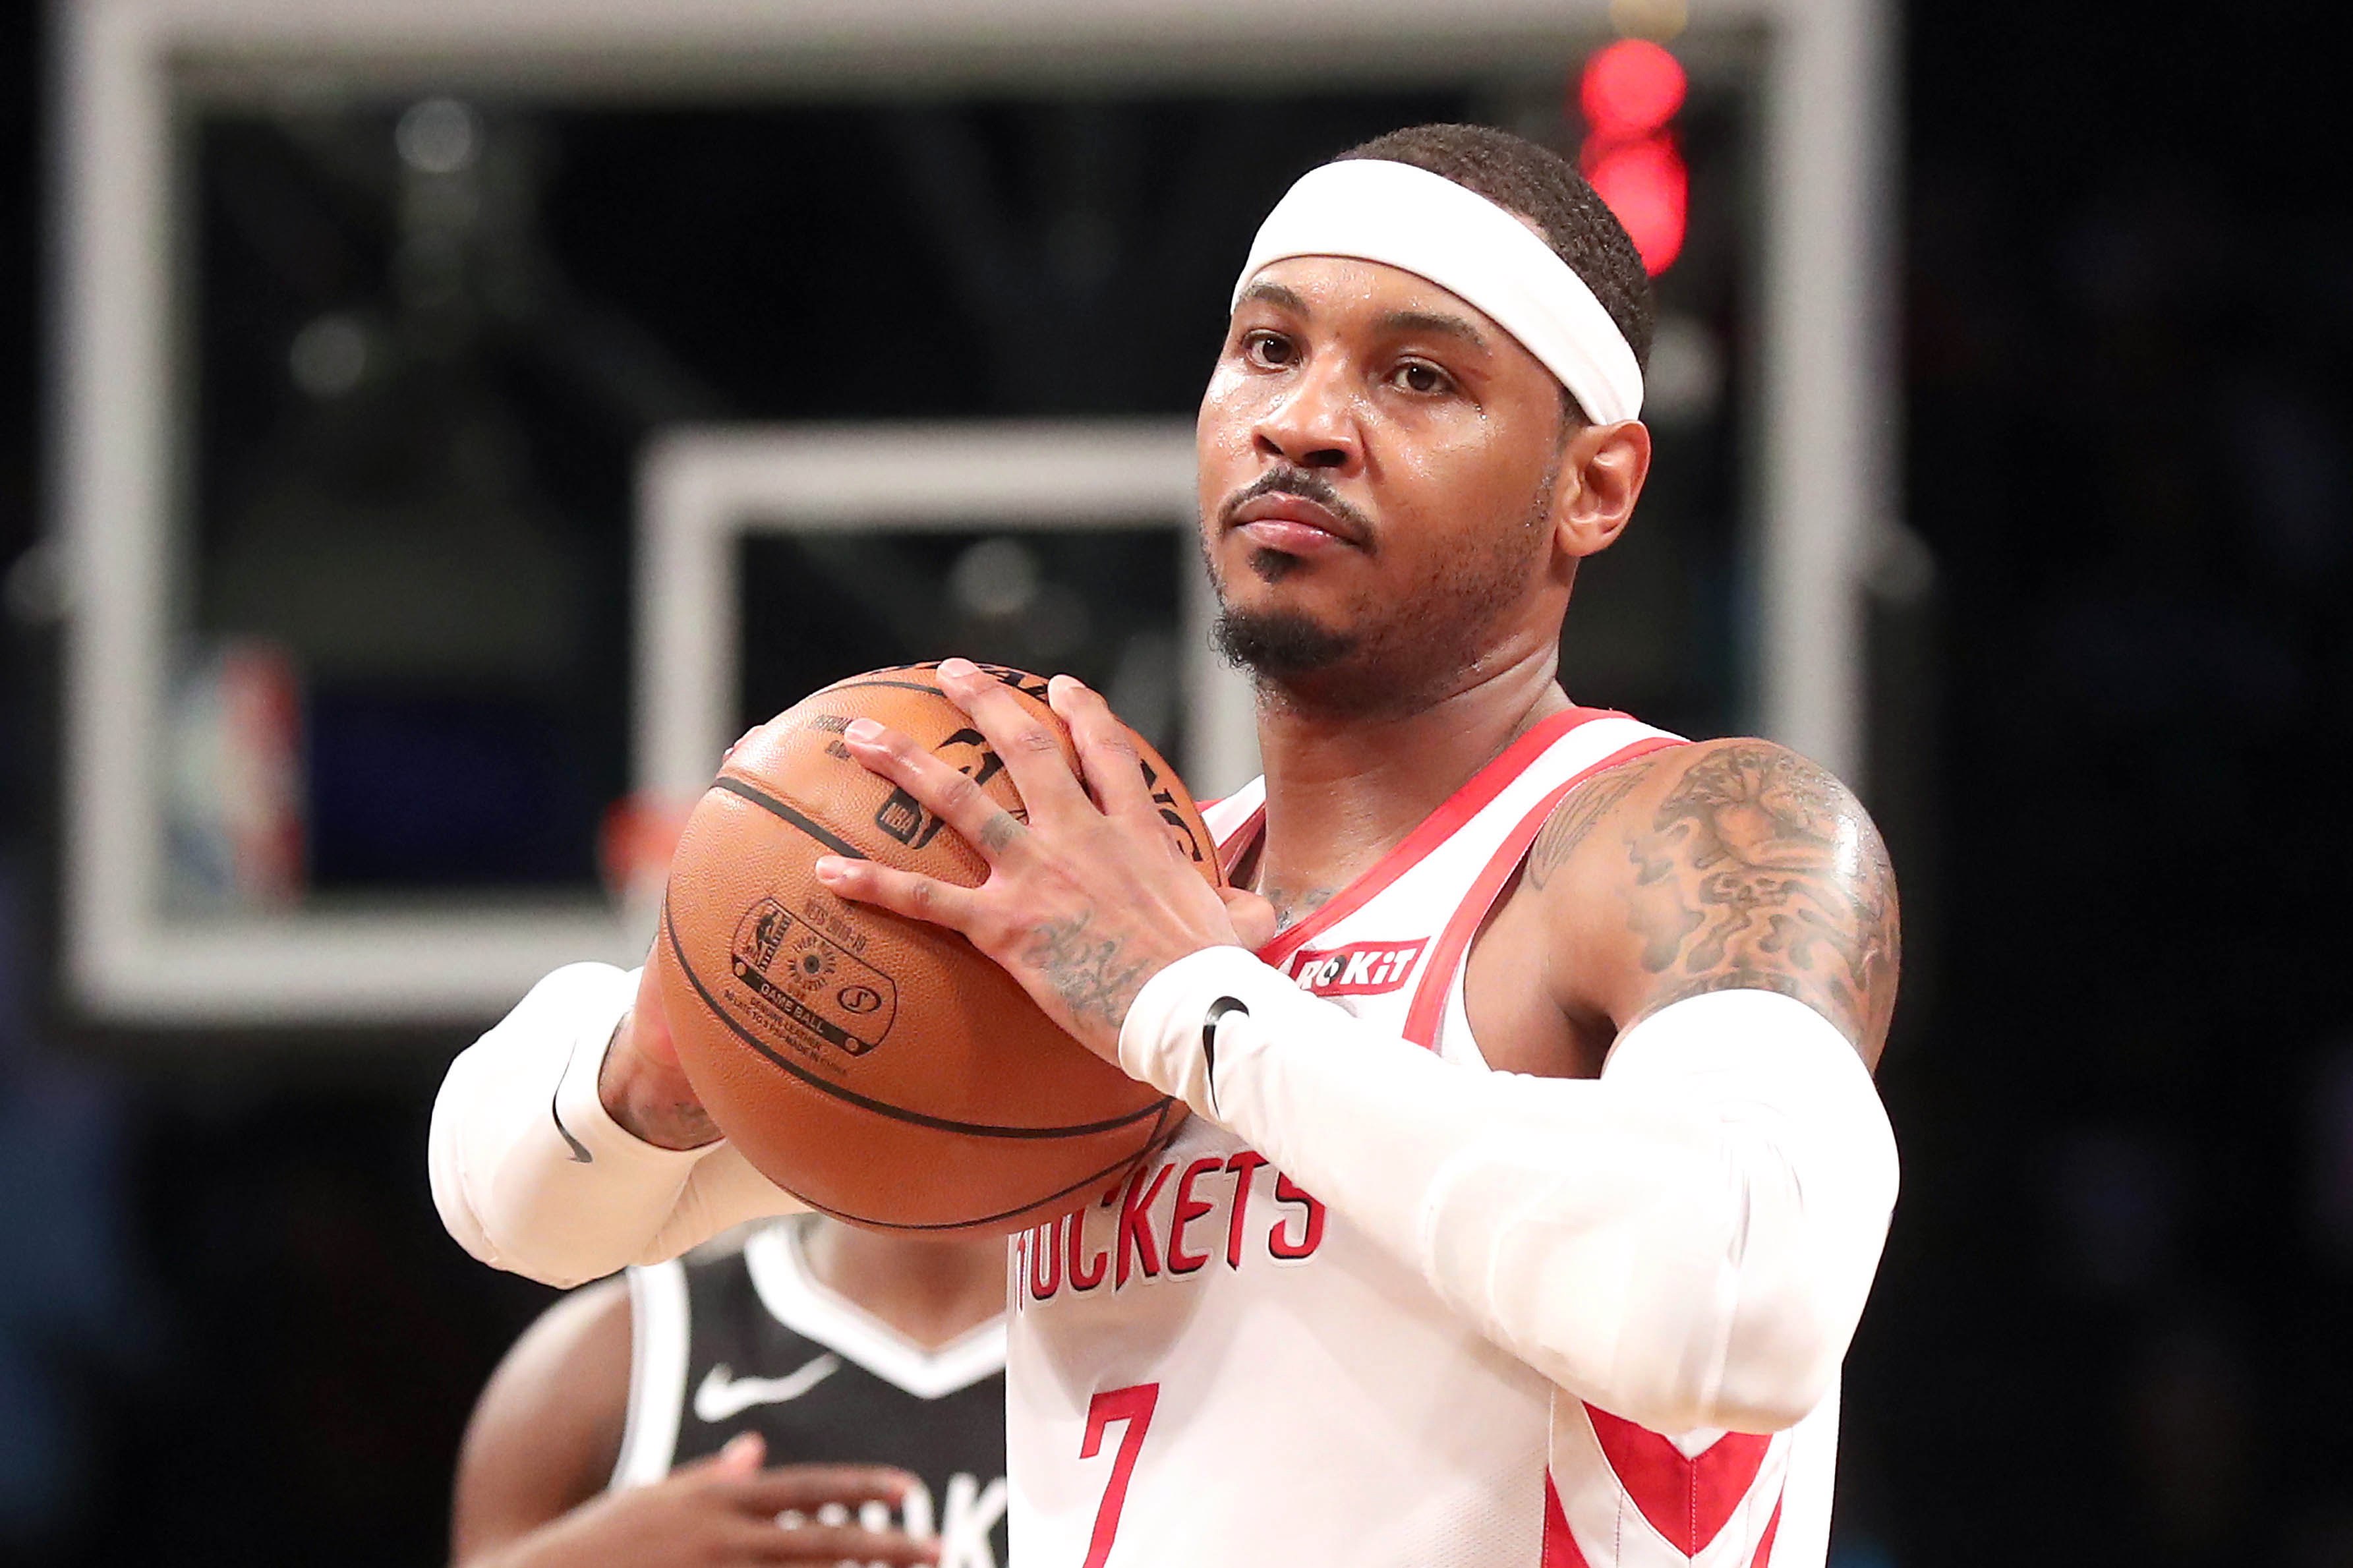 NBA Rumors: Carmelo Anthony New York Knicks Deal in The Works Claims Ex-Knicks Player ...3570 x 2379